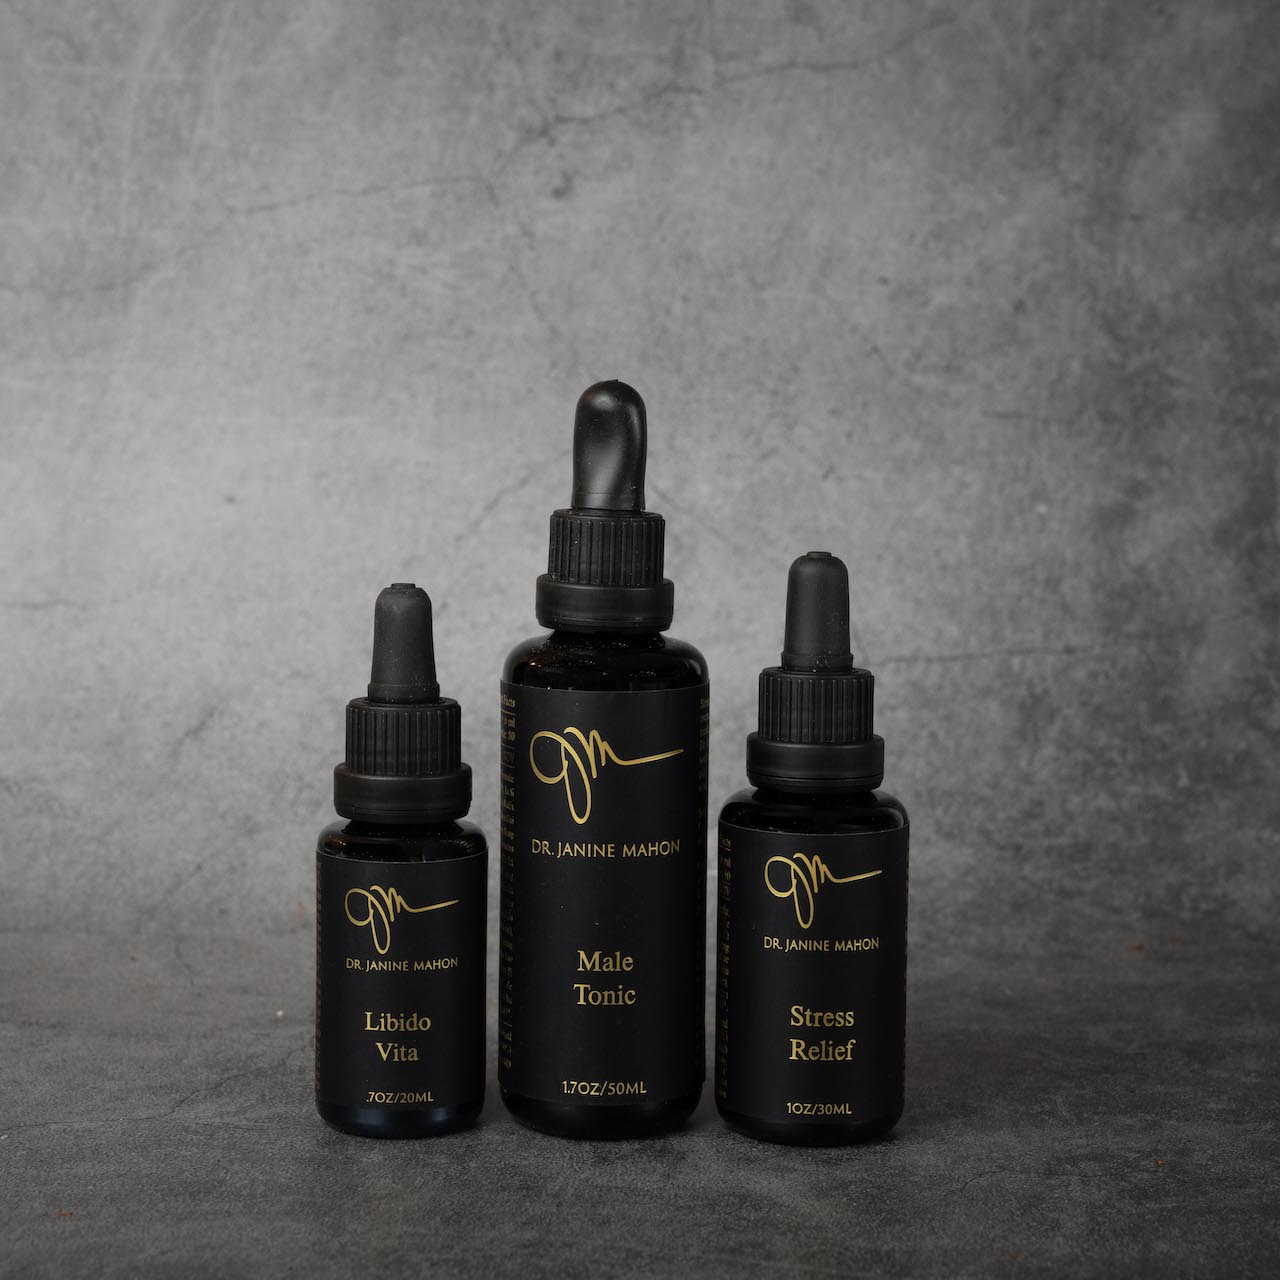 Three black bottles with gold lettering next to each other. The first bottle reads "Libido Vita", the second "Male Tonic", the third "Stress Relief". These three bottles are the full line of Dr. Janine Mahon products.